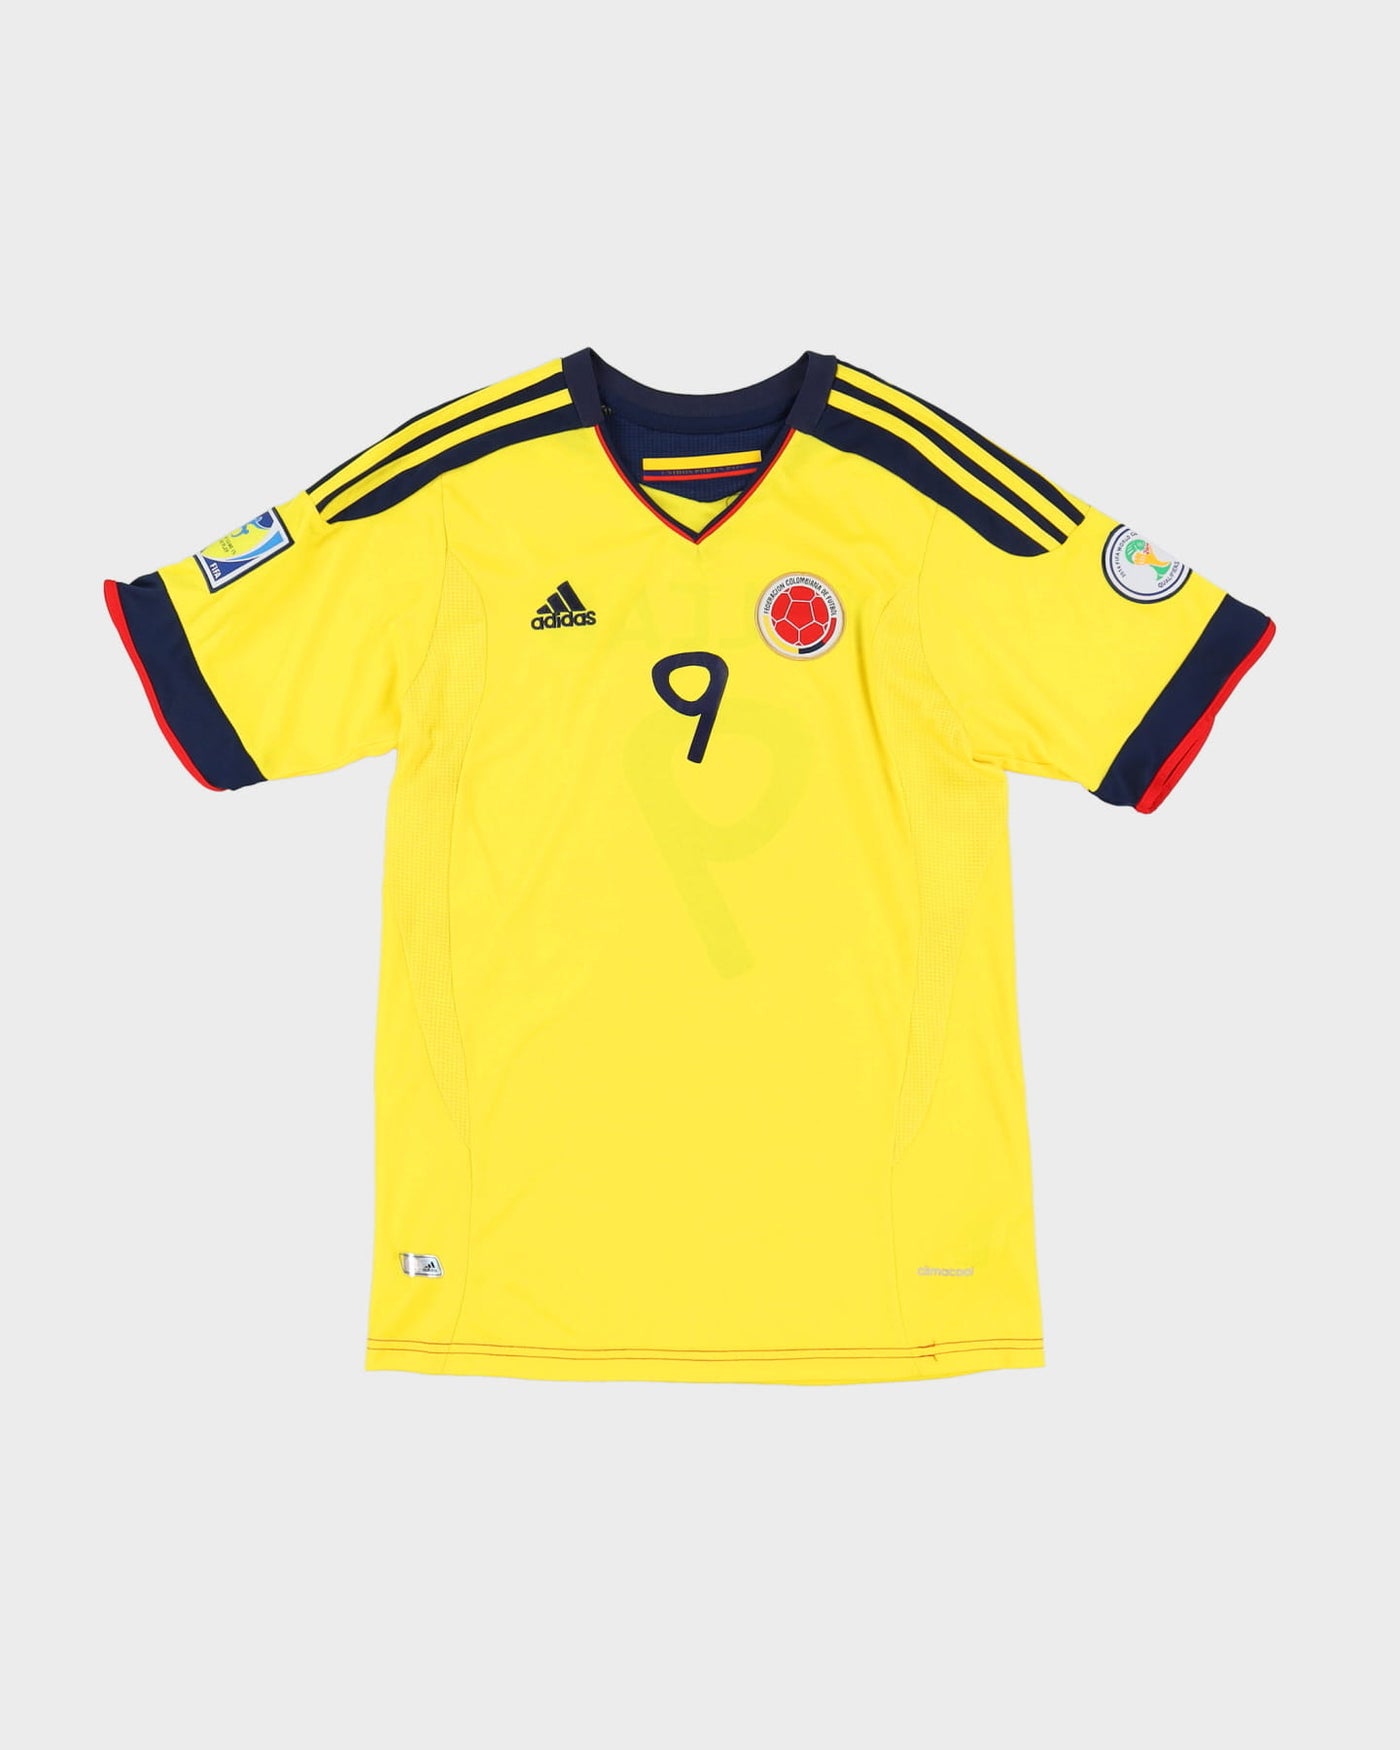 Adidas Falcao Columbia 2014 World Cup Qualifiers Yellow Football Shirt / Jersey - S